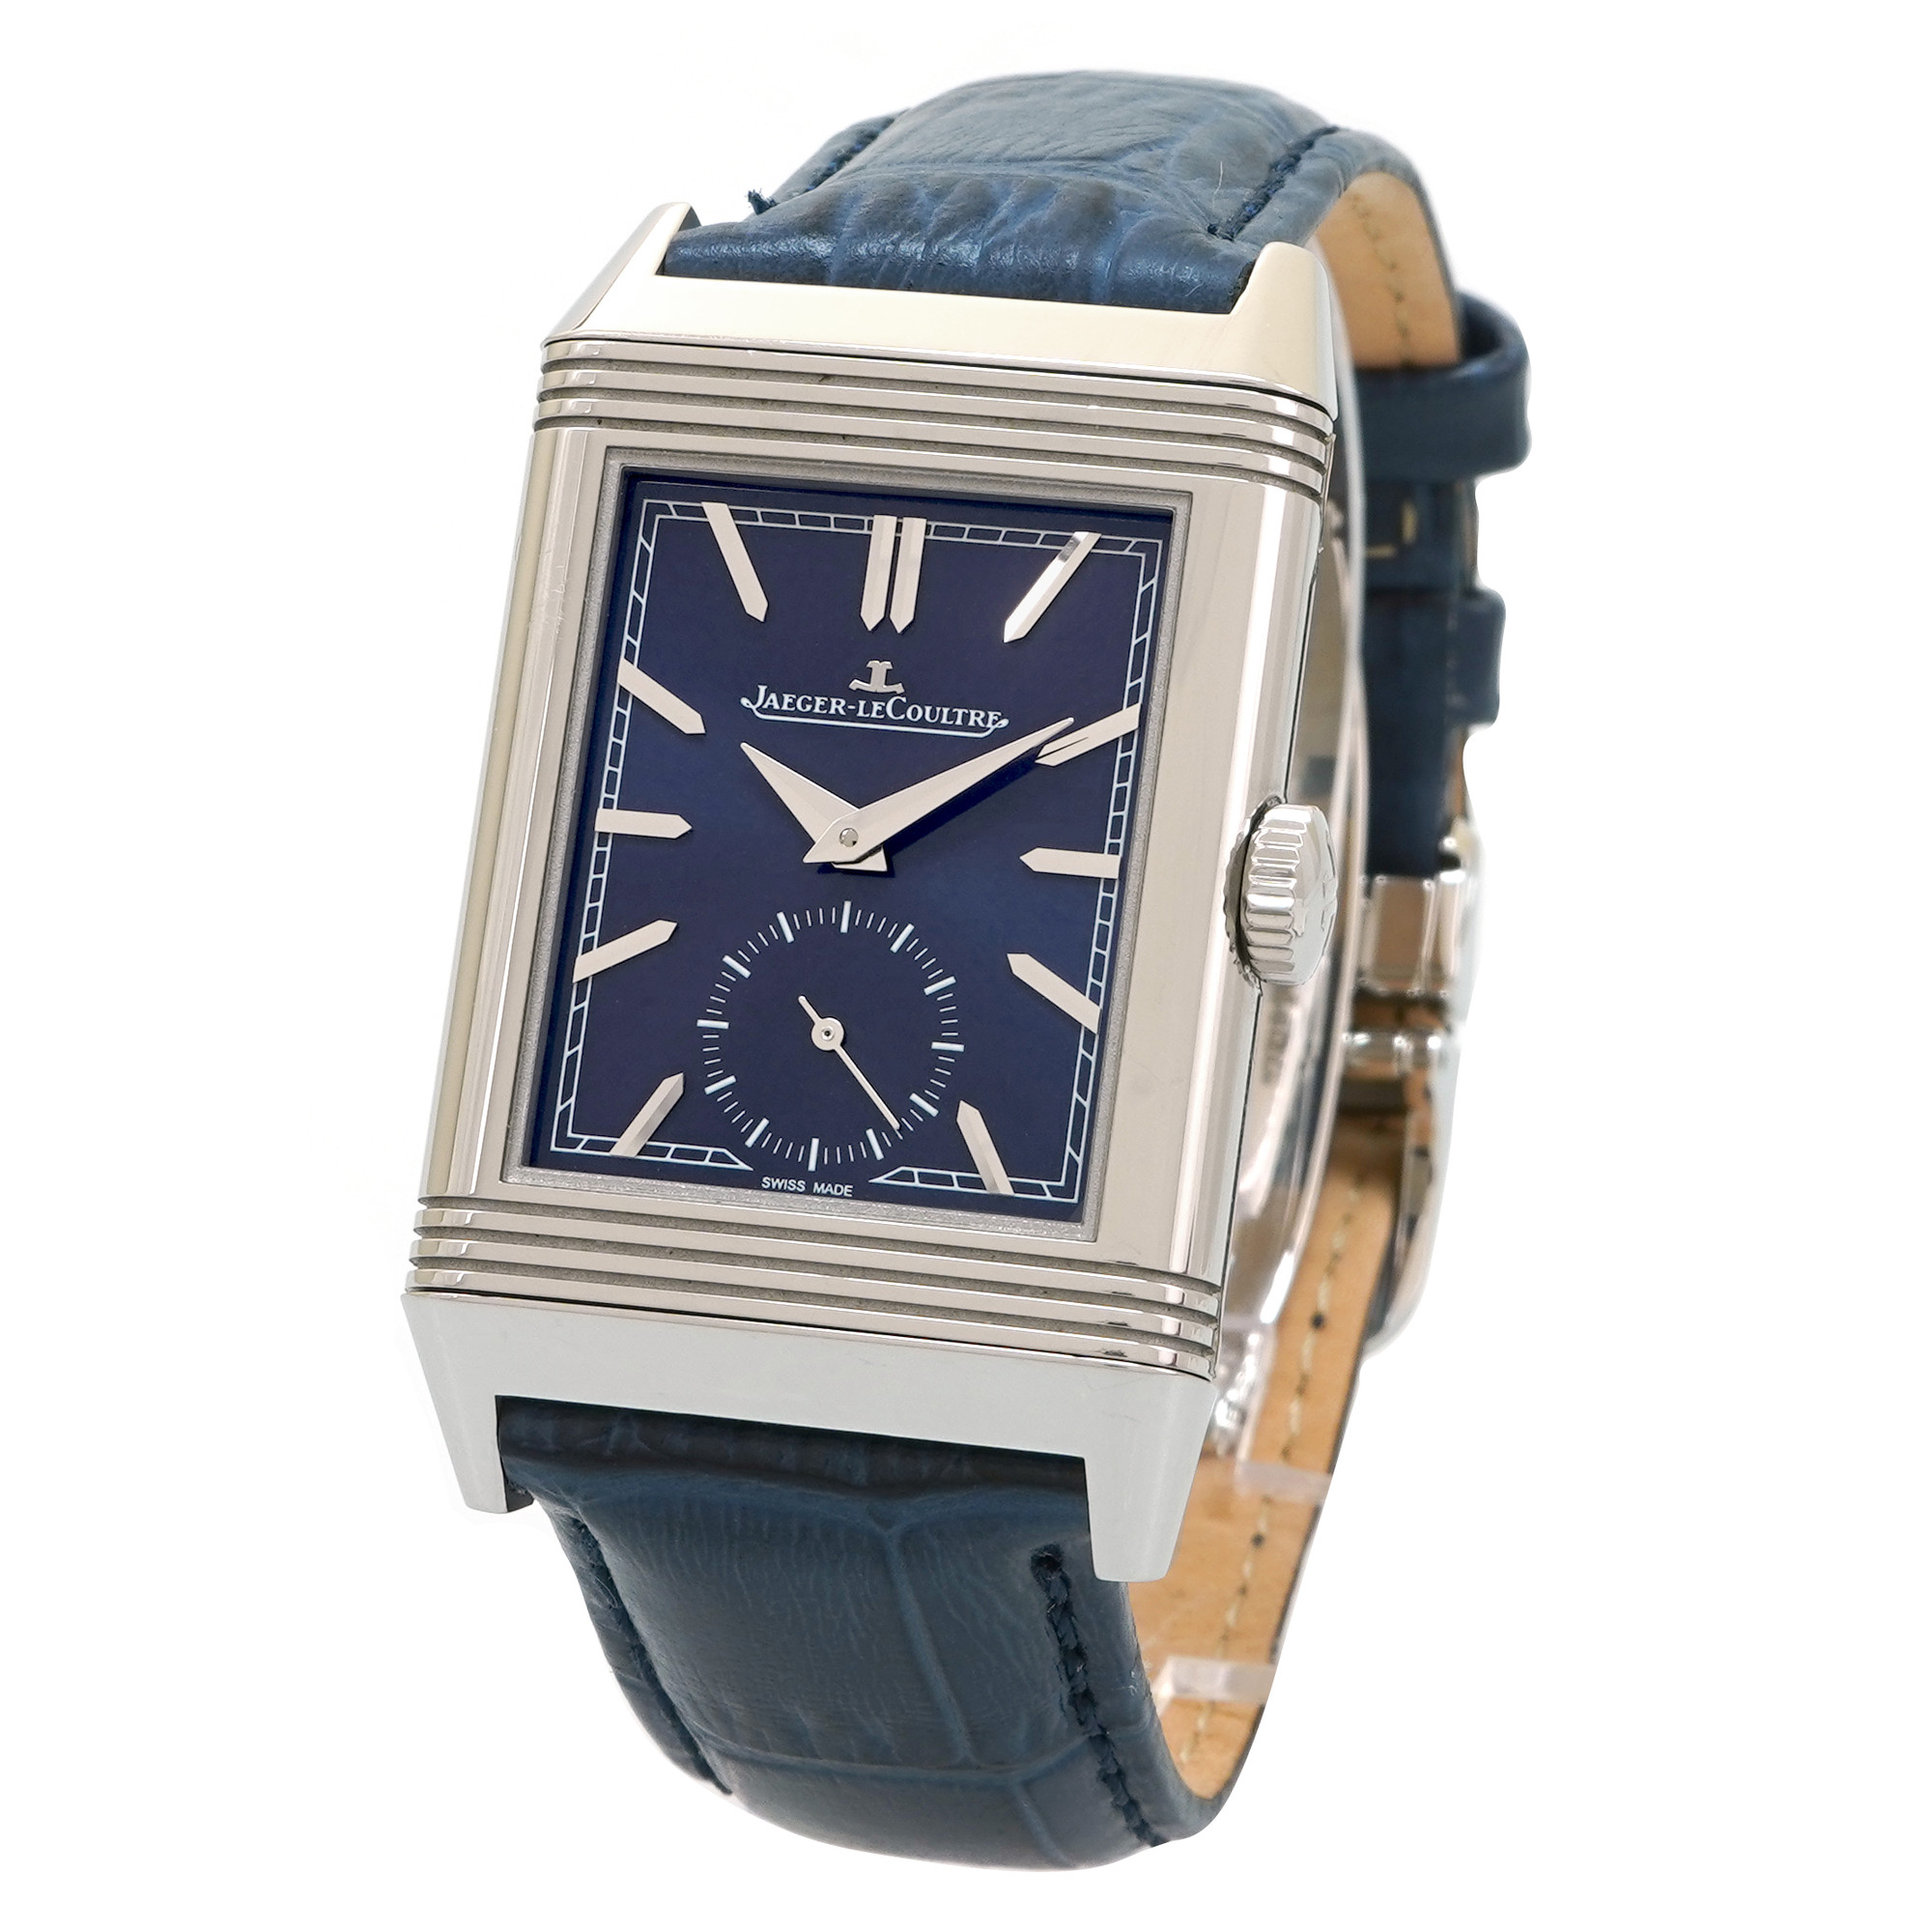 Jaeger-LeCoultre Tribute Reverso Small Seconds *Blue Dial* - Inventory 3897